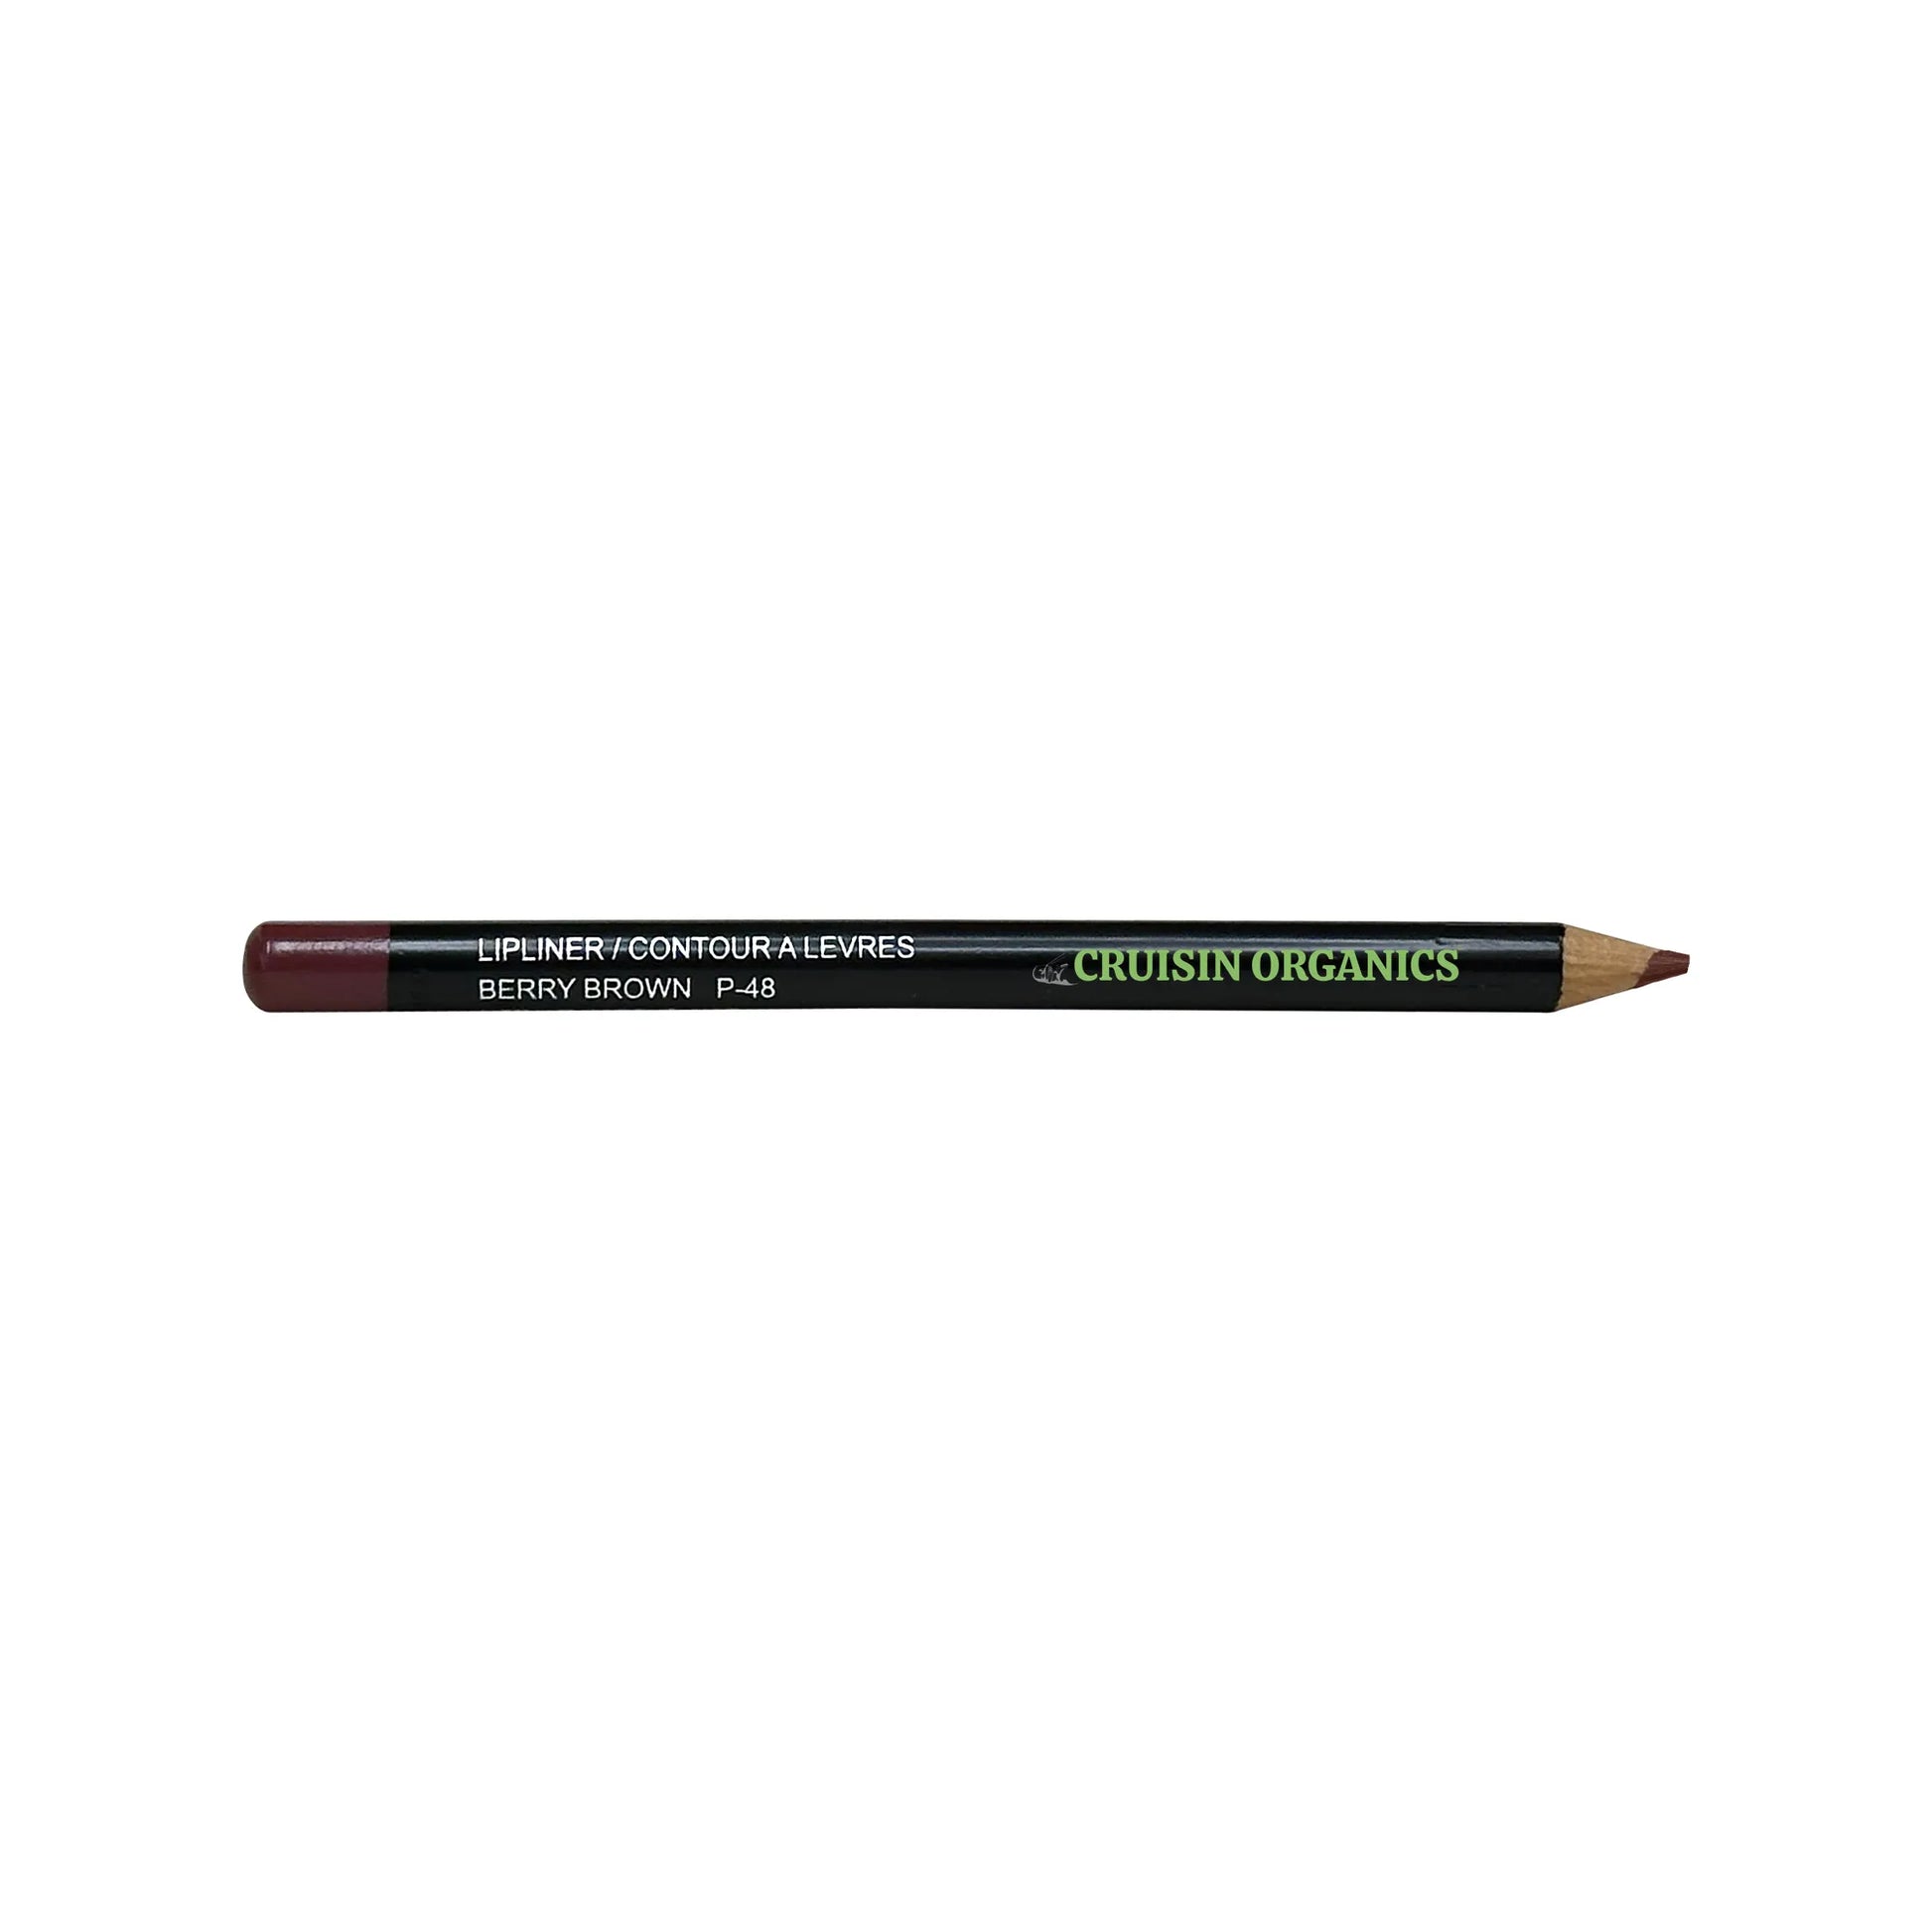 Experience the creamy and dreamy Berry Brown Lip Liner from Cruisin Organics. This liner enhances your distinctive lip look with precision and style.